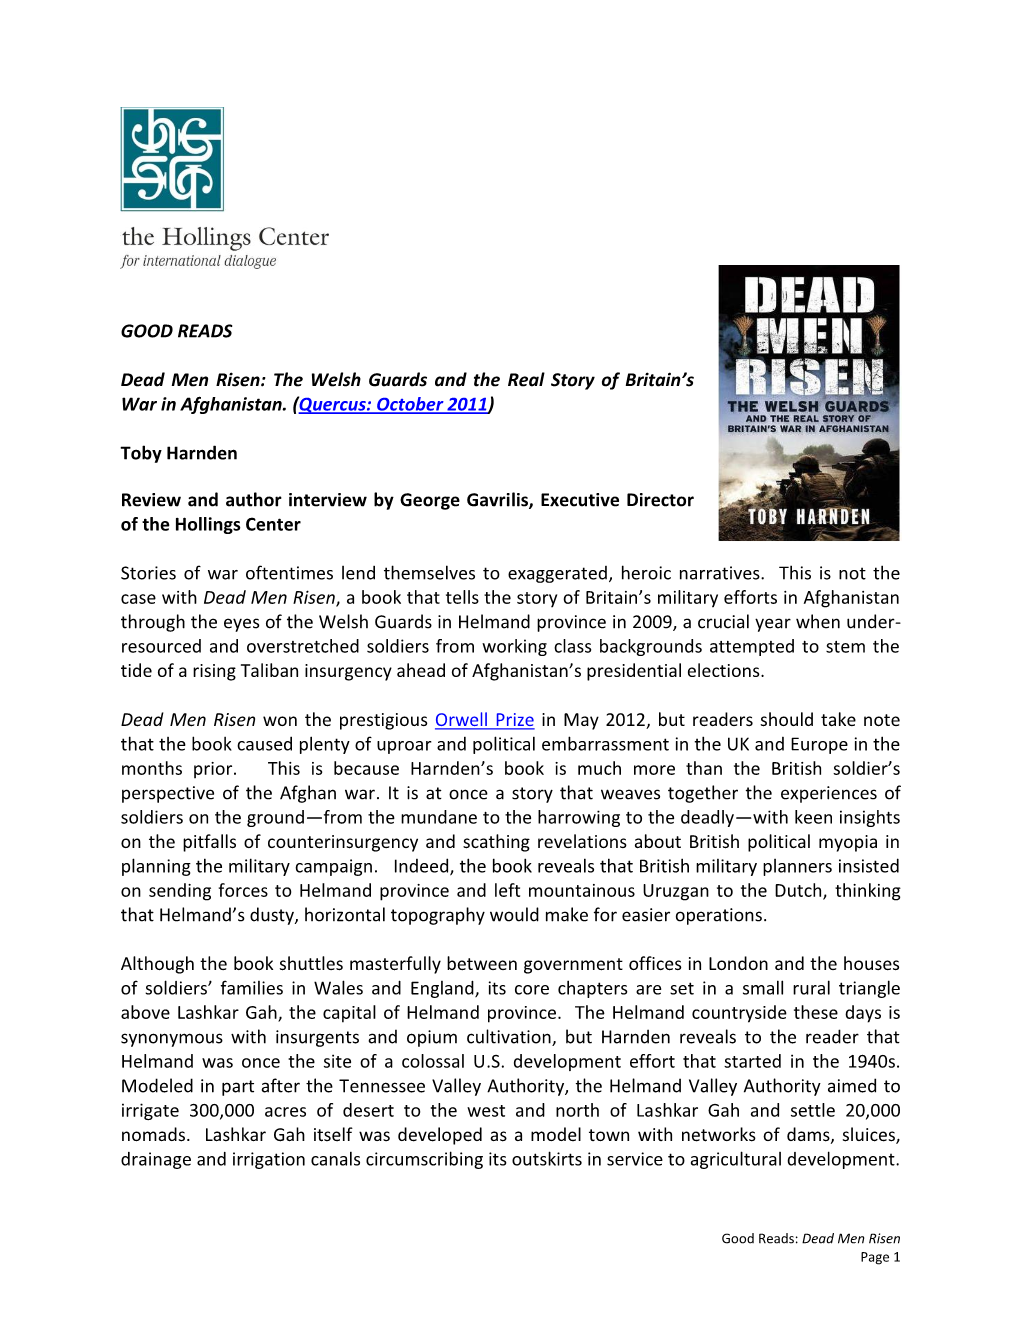 GOOD READS Dead Men Risen: the Welsh Guards and the Real Story of Britain's War in Afghanistan. (Quercus: October 2011) Toby H